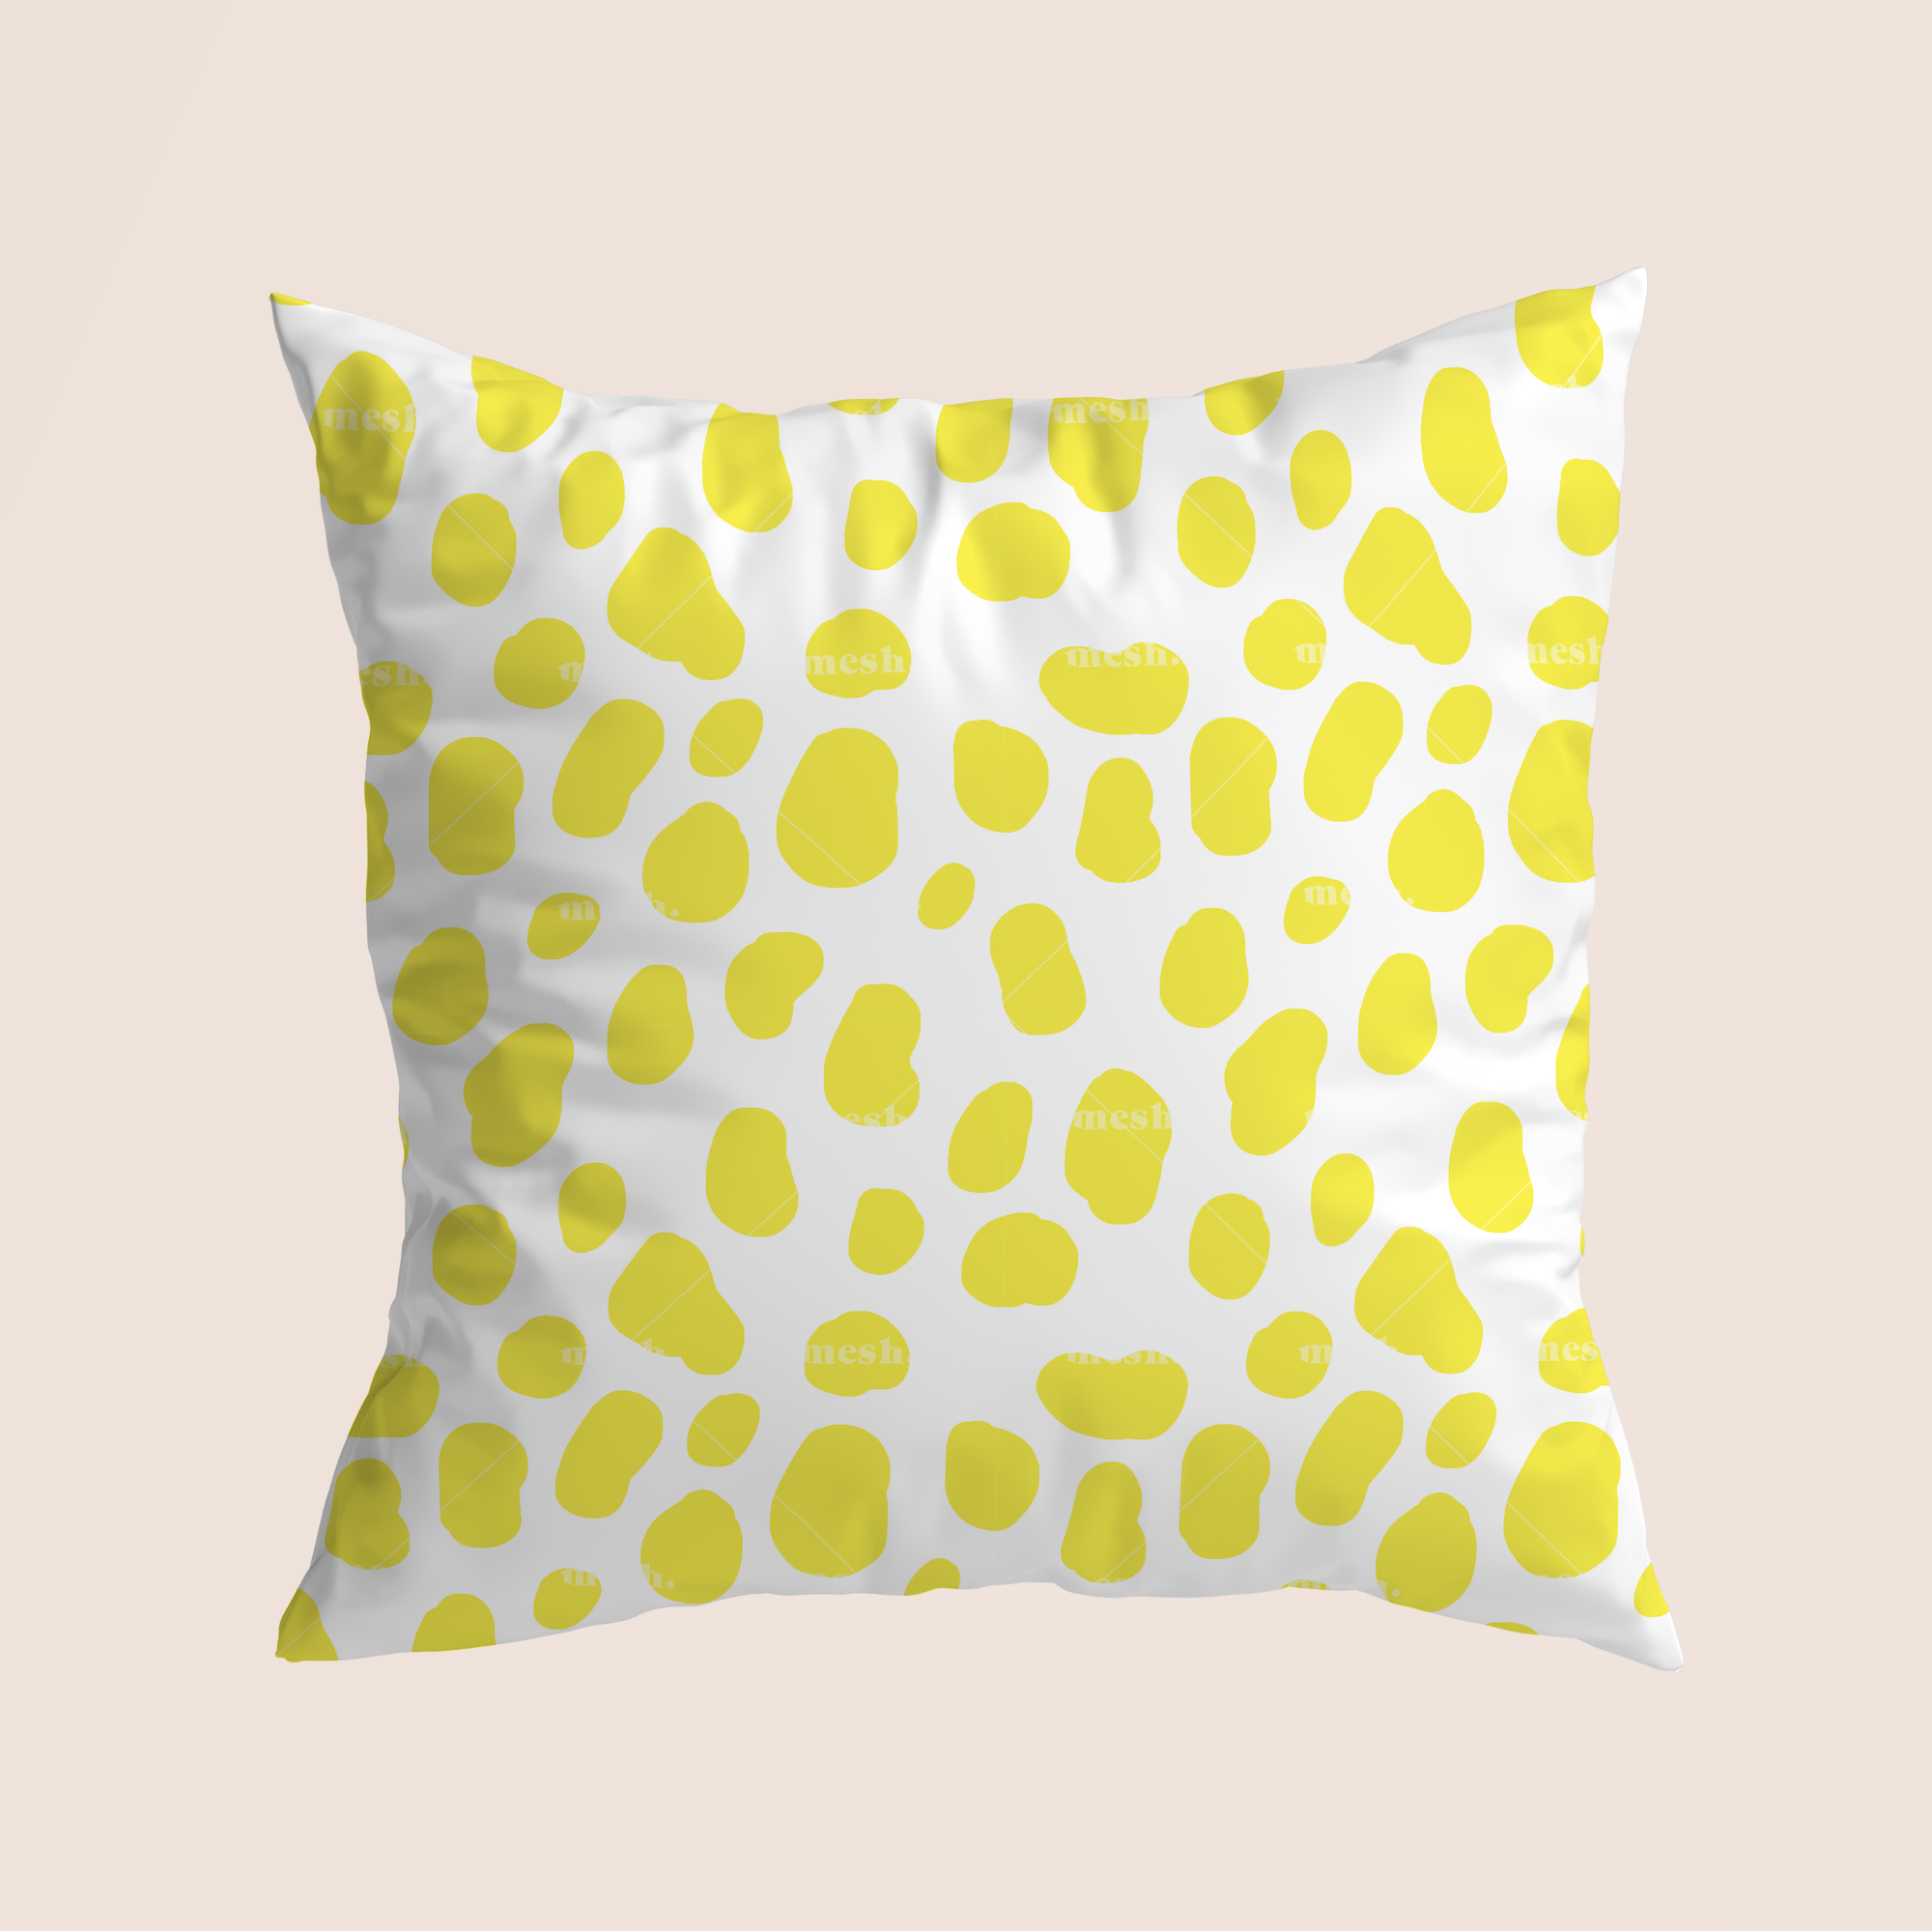 Wild animal coloured skin in yellow pattern design on recycled fabric pillow